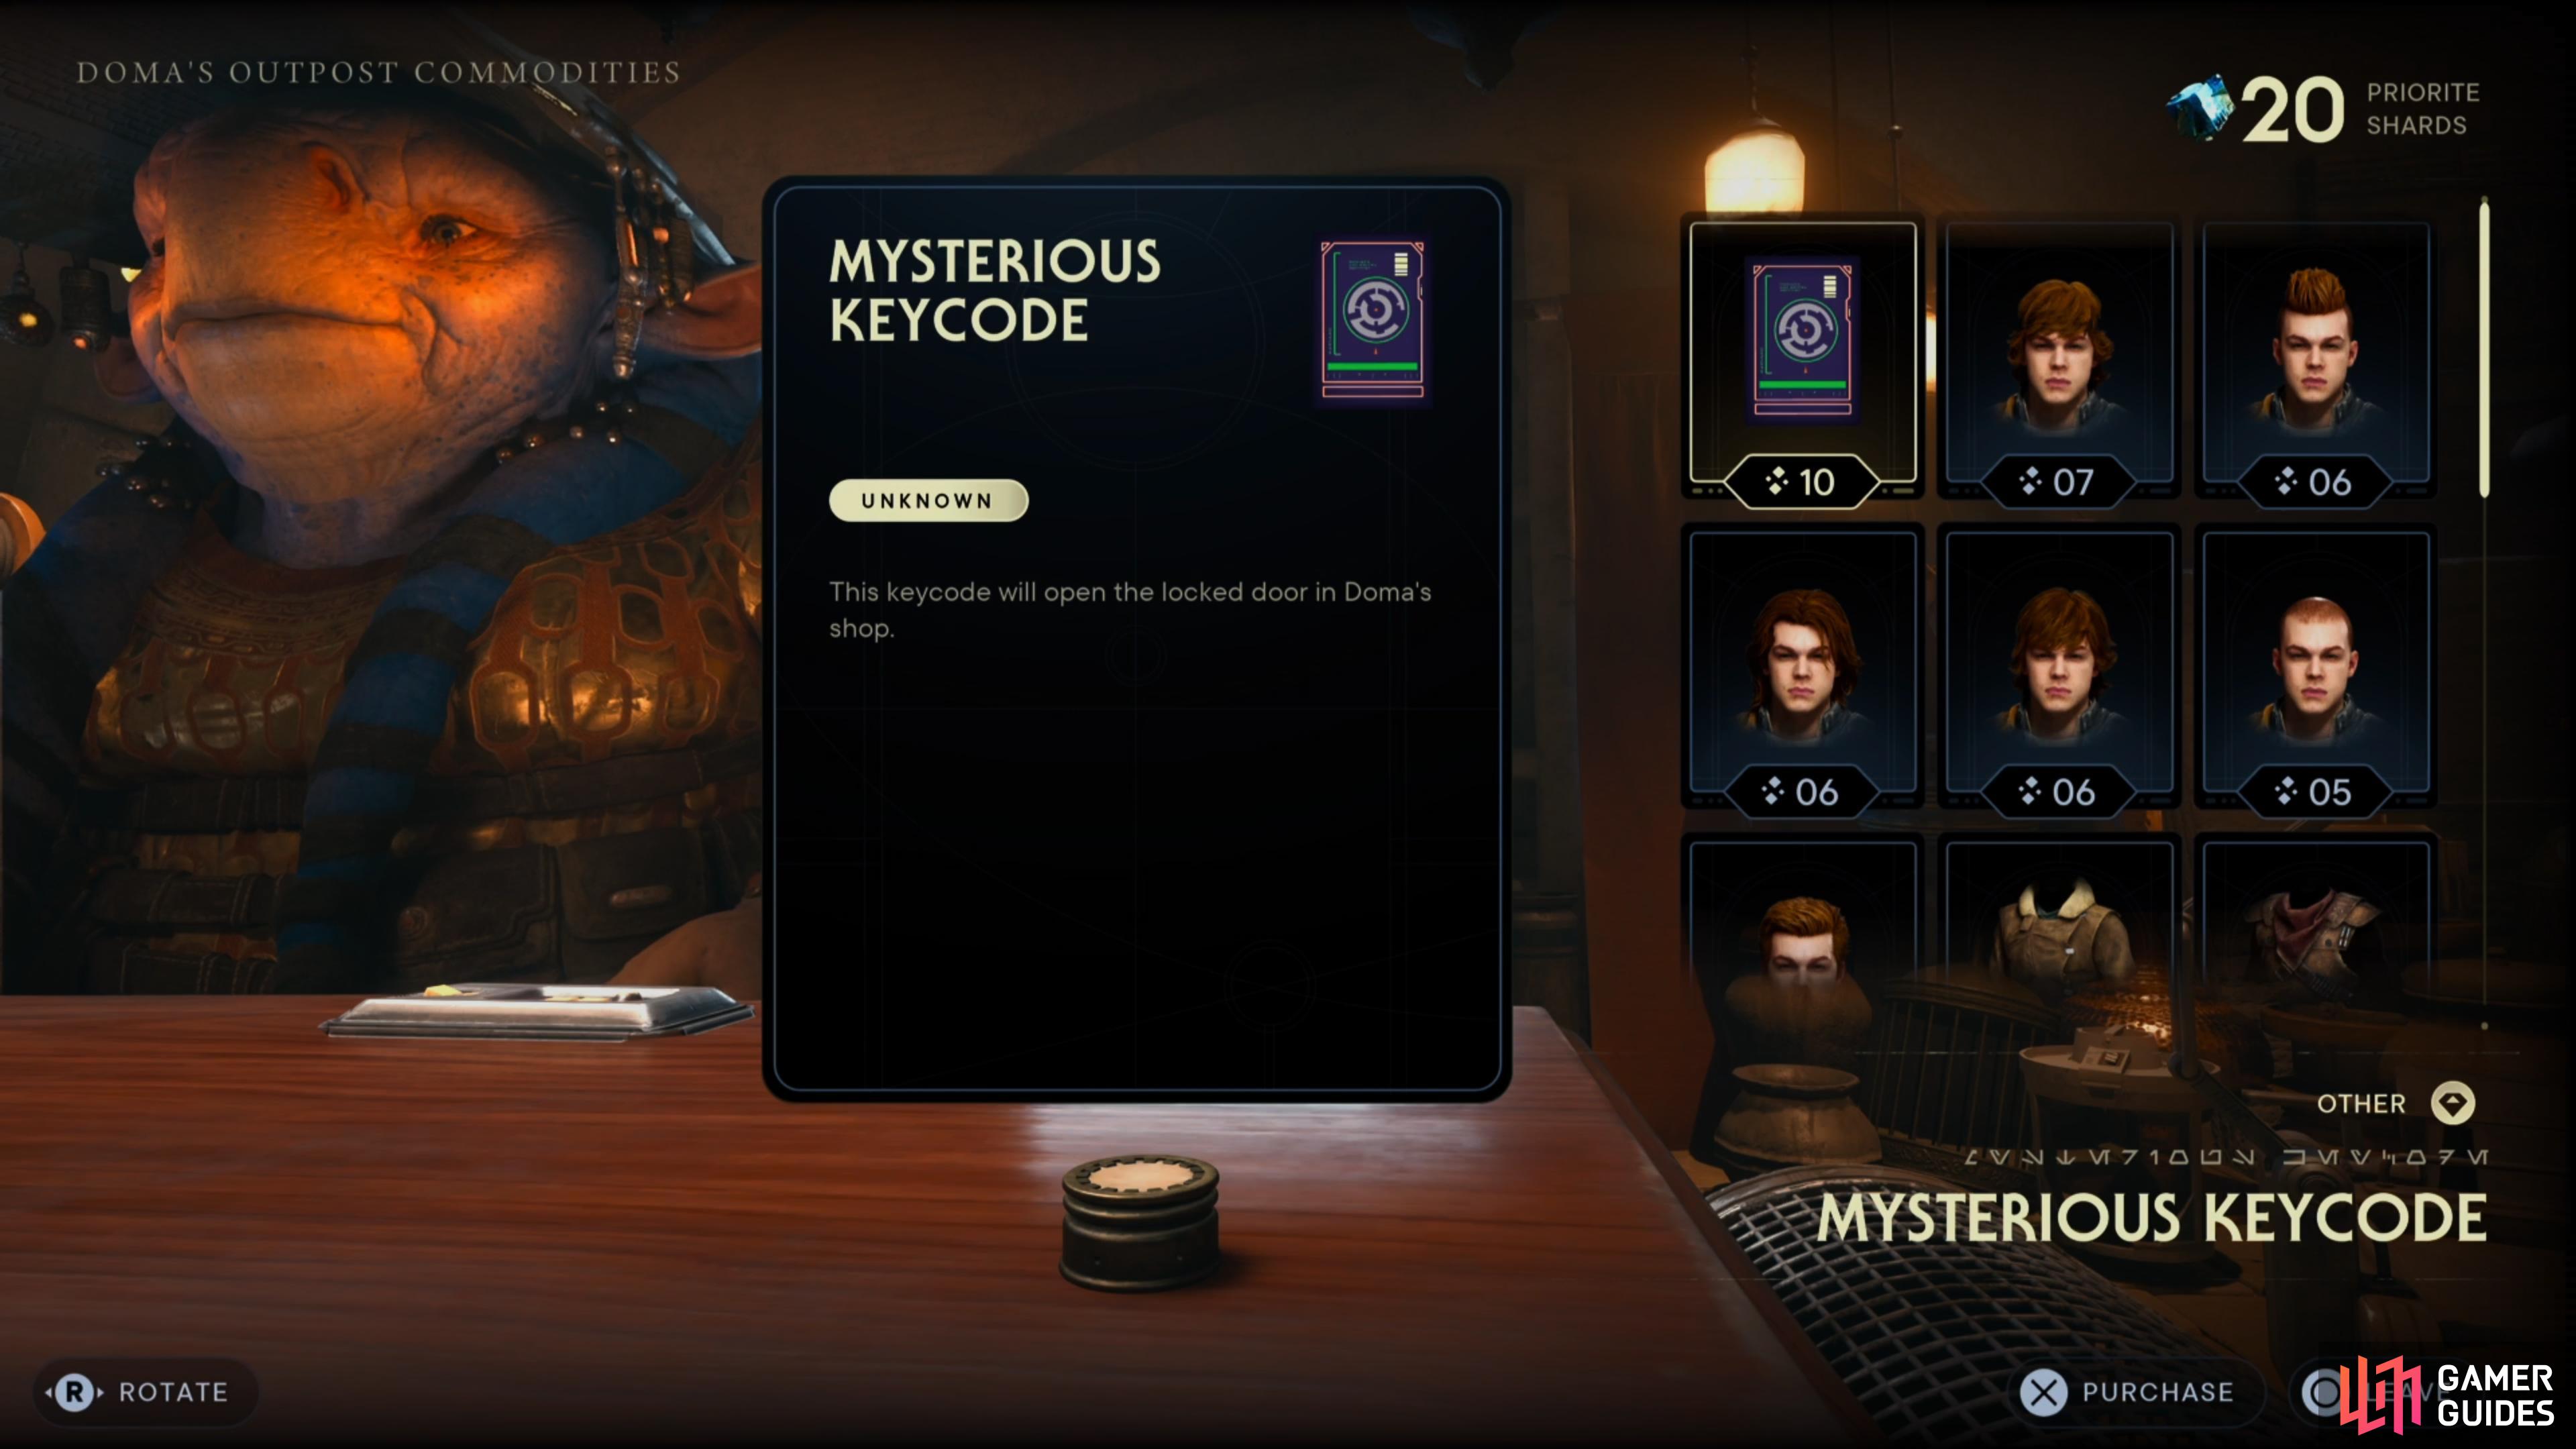 You can purchase the Mysterious Keycode at Doma's Shop on Koboh.